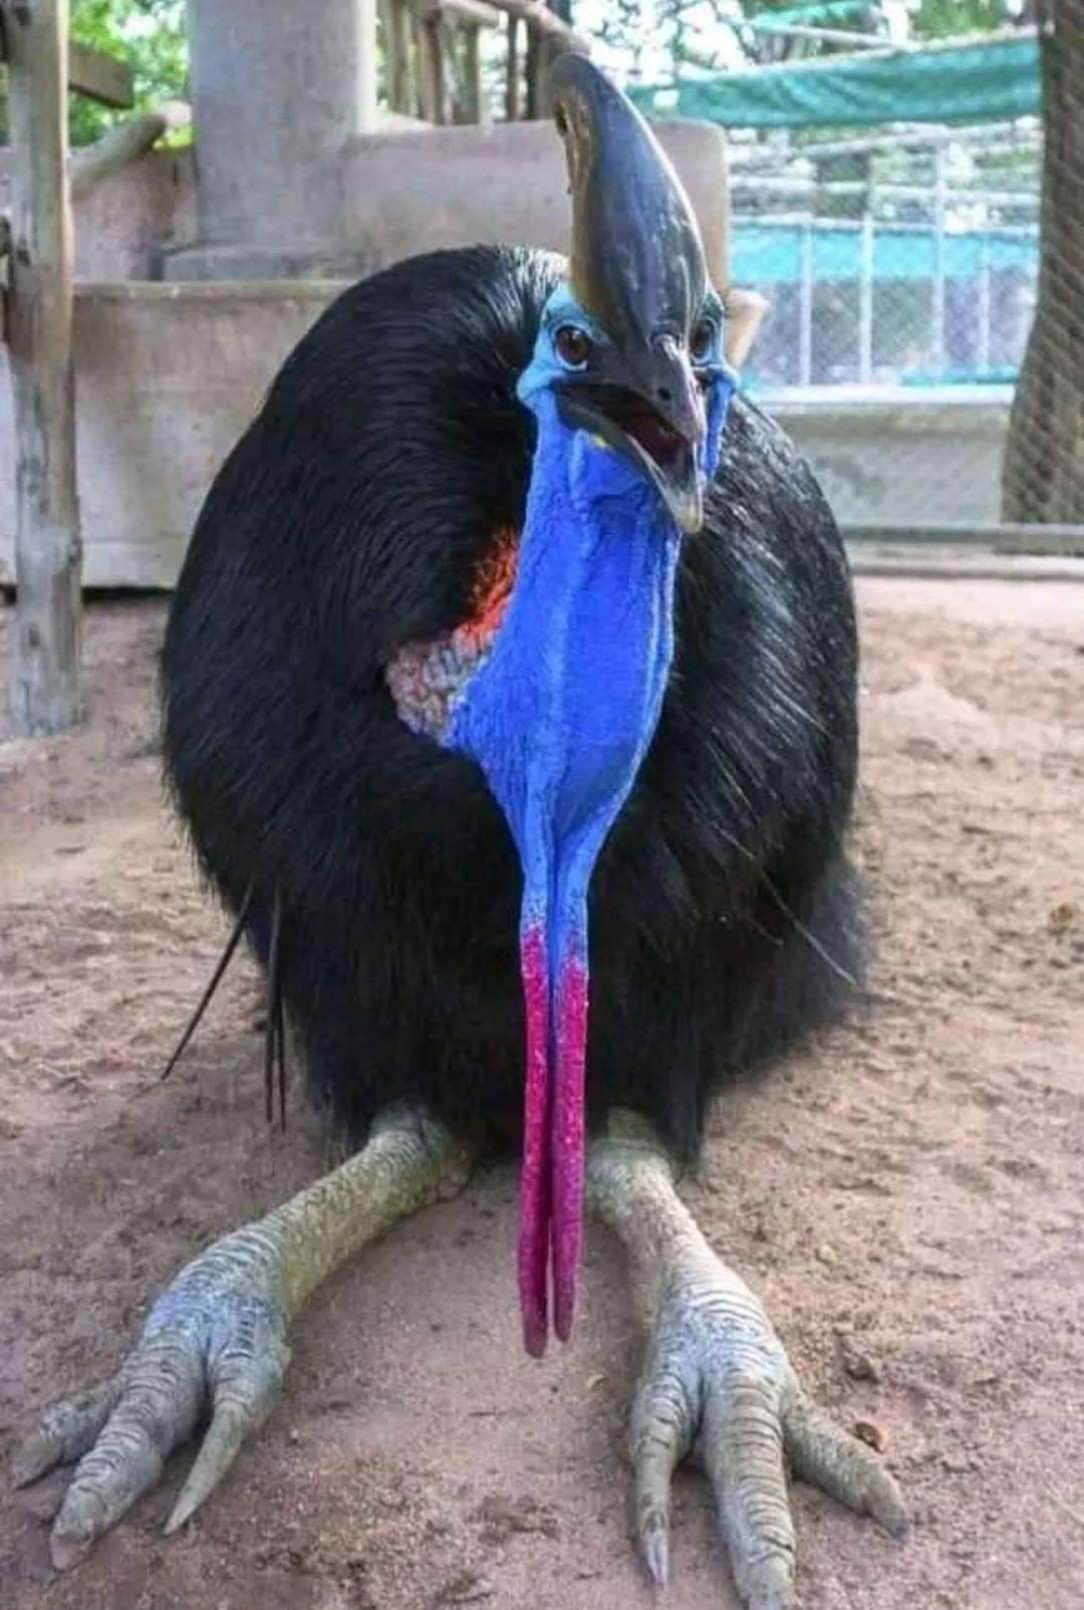 The Cassowary is believed to be the most dangerous bird in the world